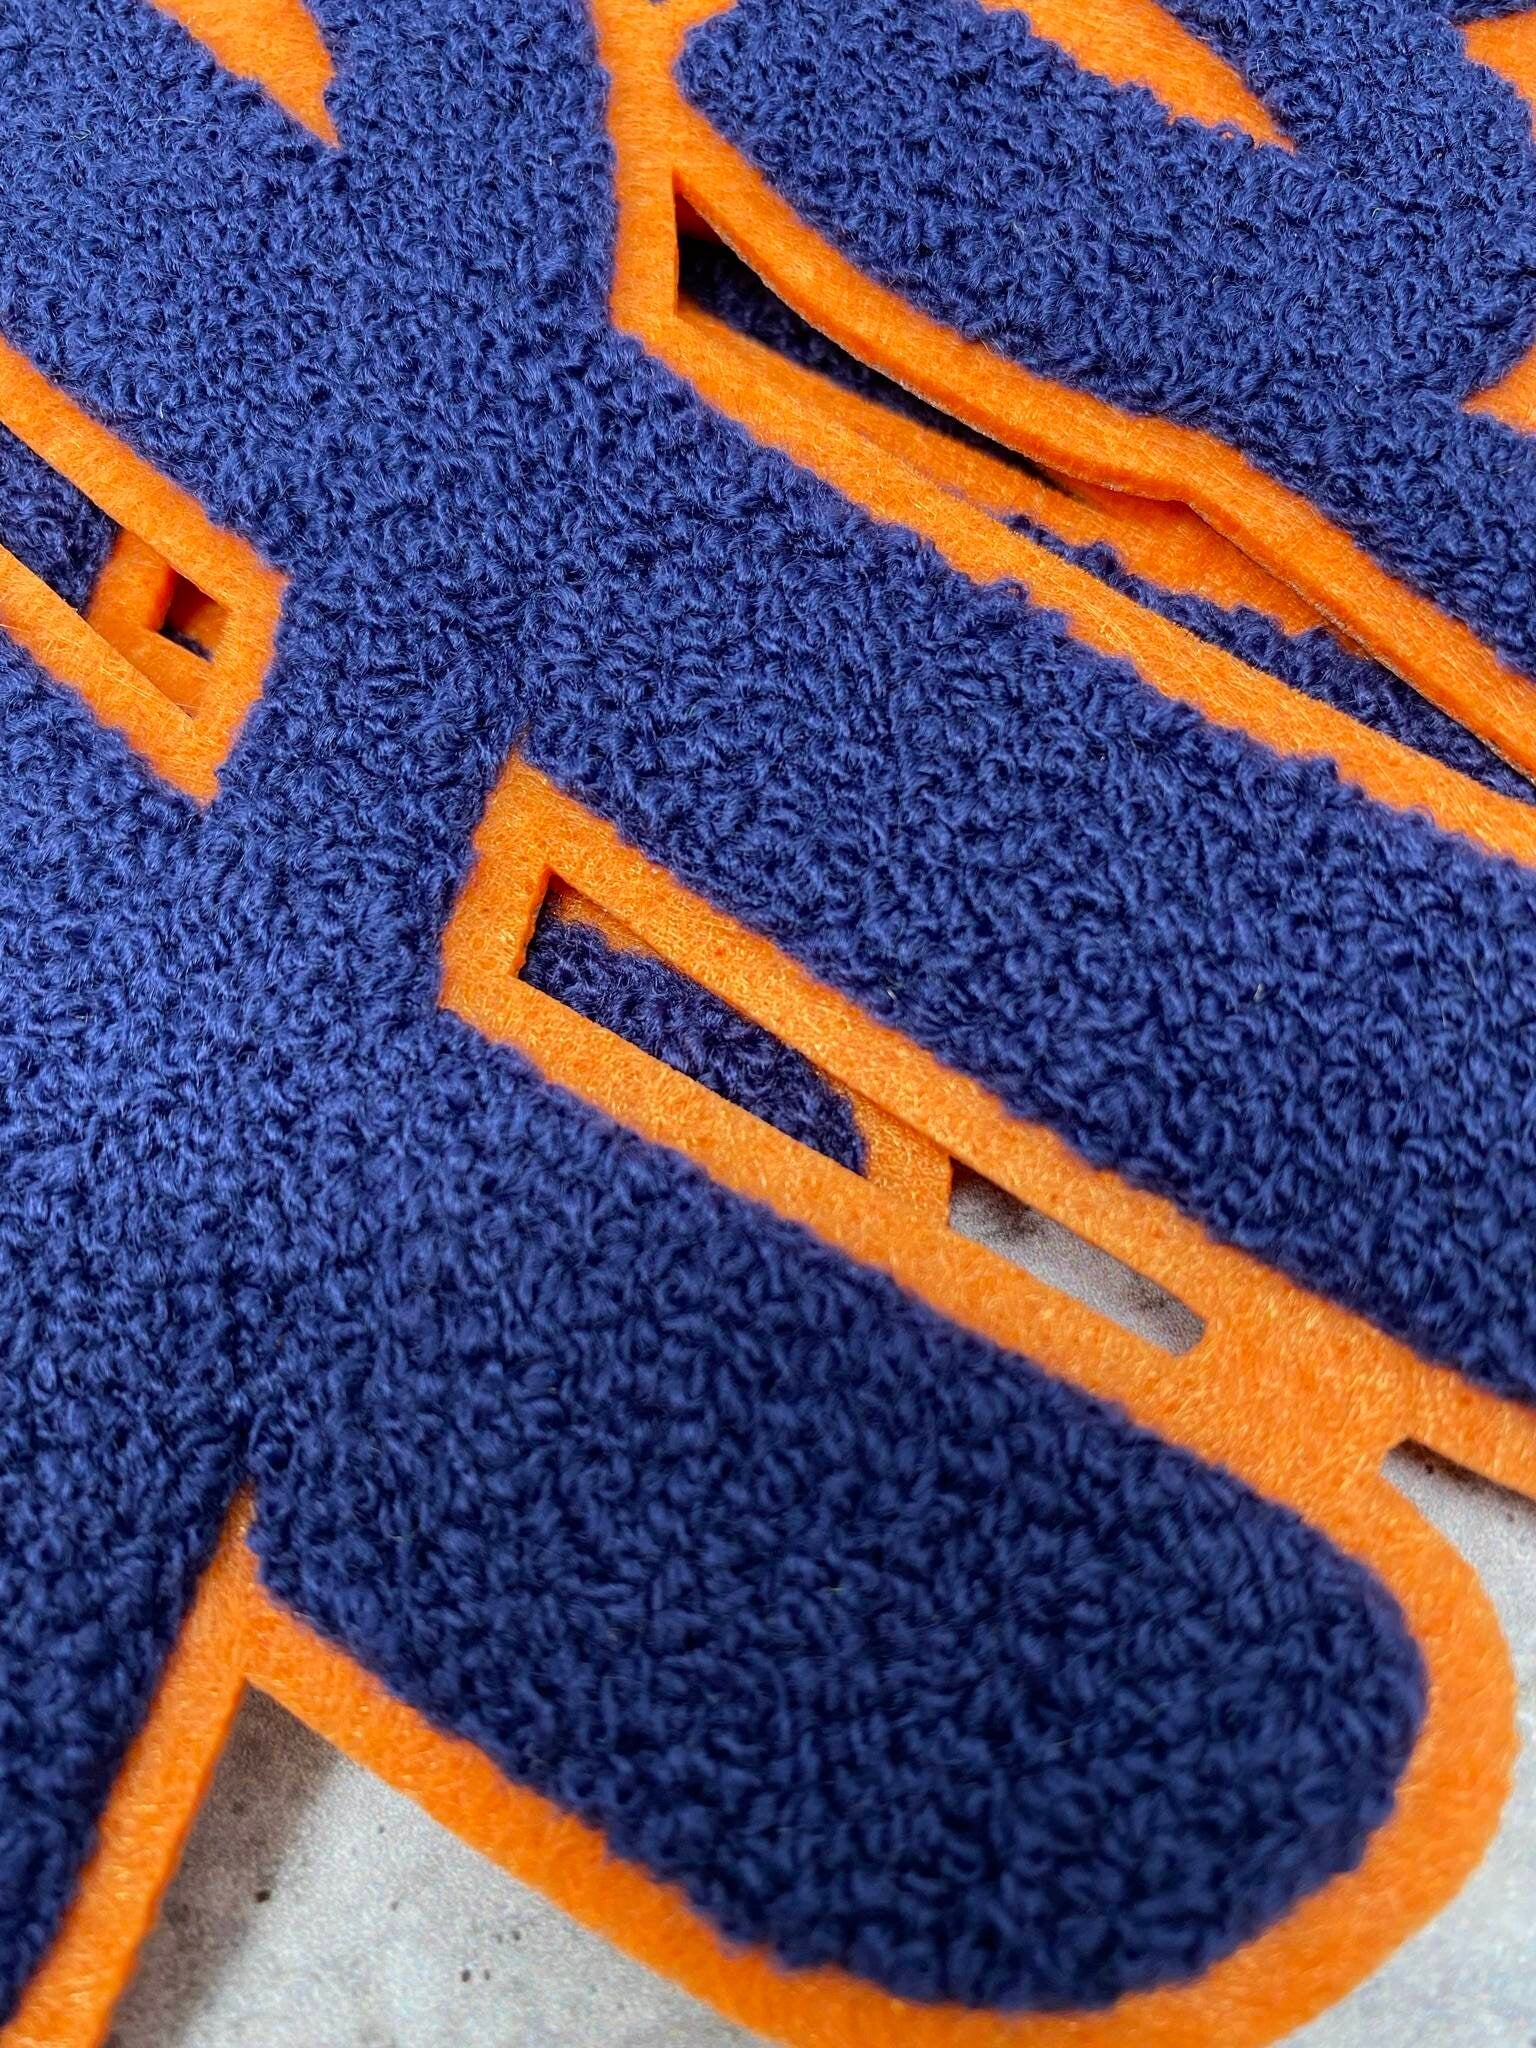 Exclusive, Navy Blue & Orange "Hustle" Chenille Patch (iron-on) Size 10"x8", Varsity Patch for Denim, Shirts and Hoodies, Large Patch